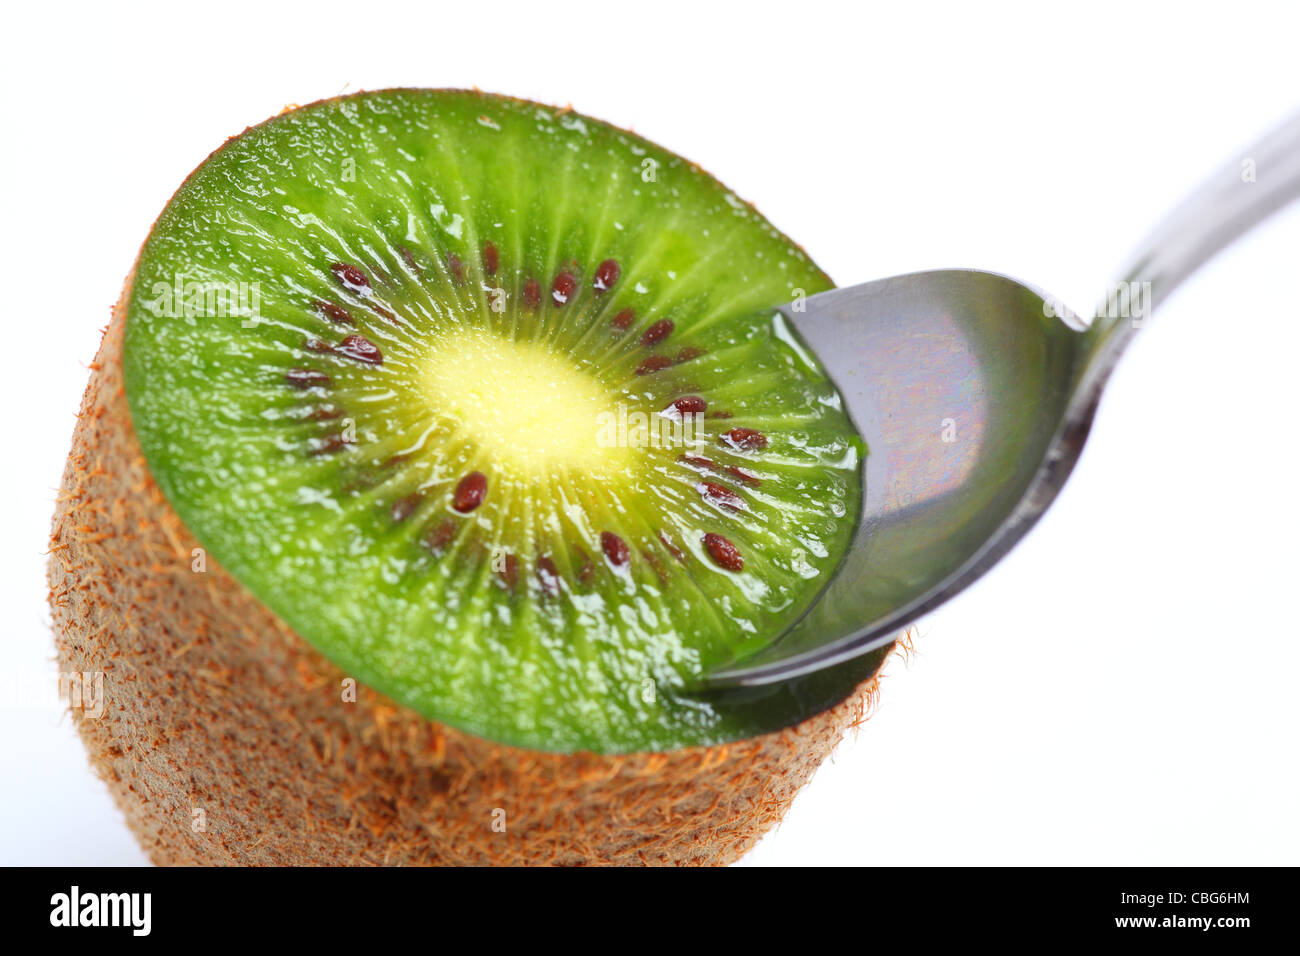 A sliced kiwi fruit, complete with spoon ready to eat Stock Photo